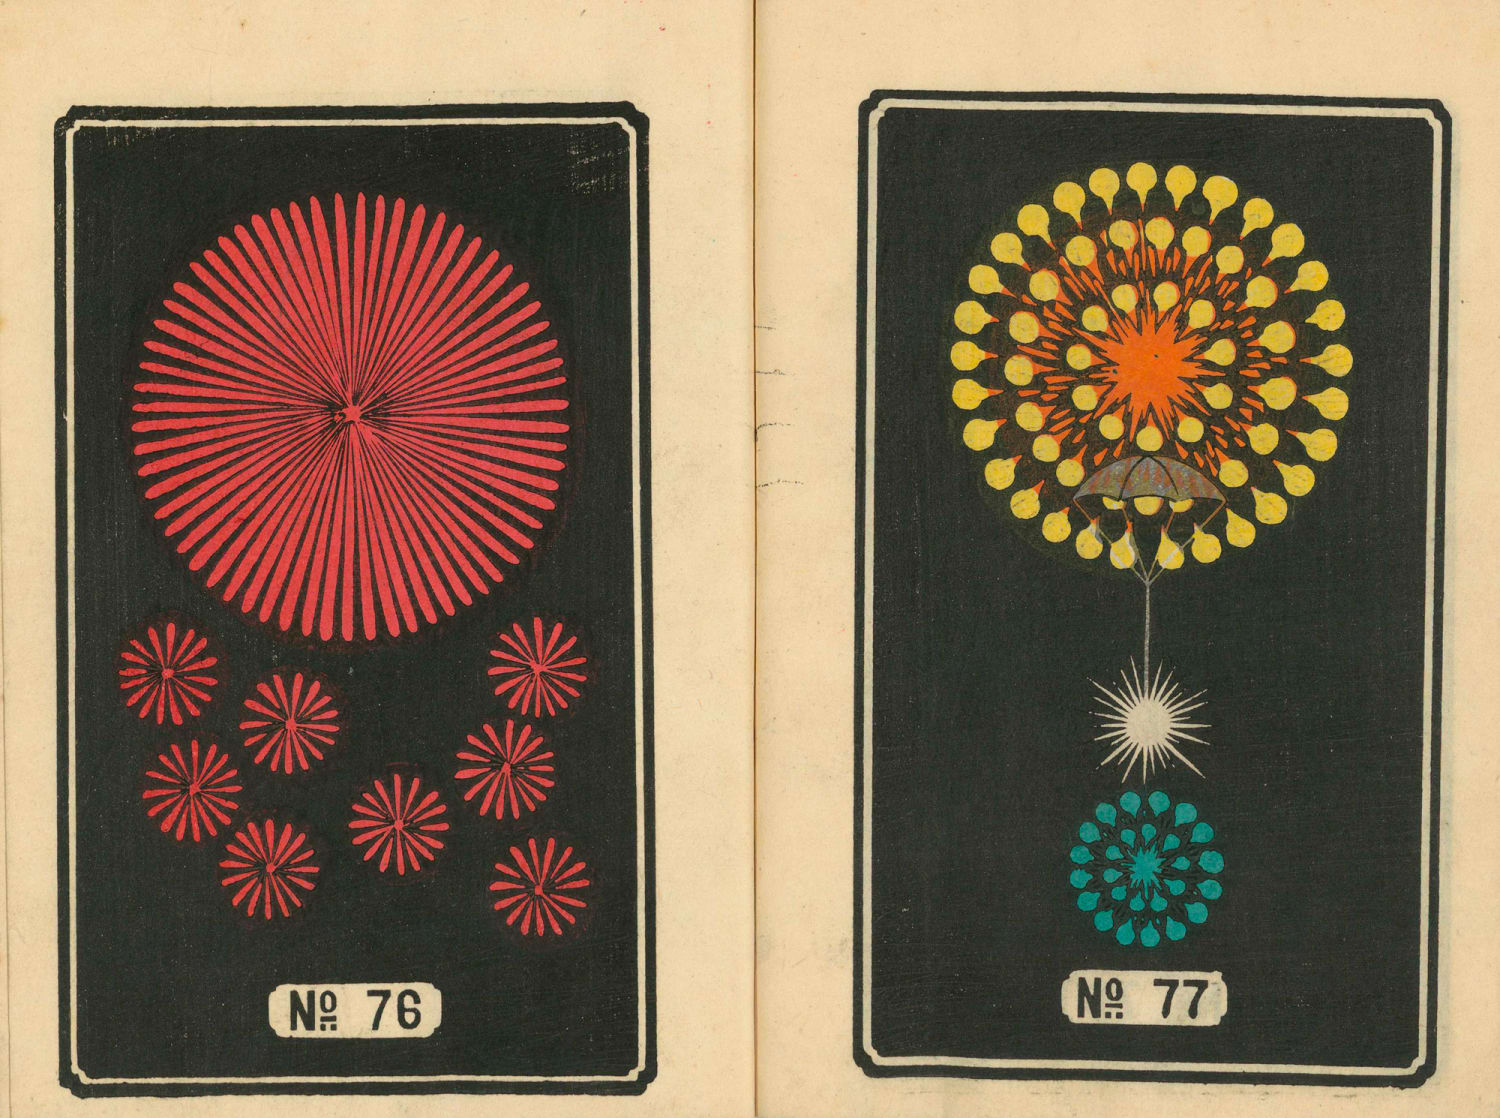 Hundreds of Japanese Firework Illustrations Now Available for Free Download — Colossal